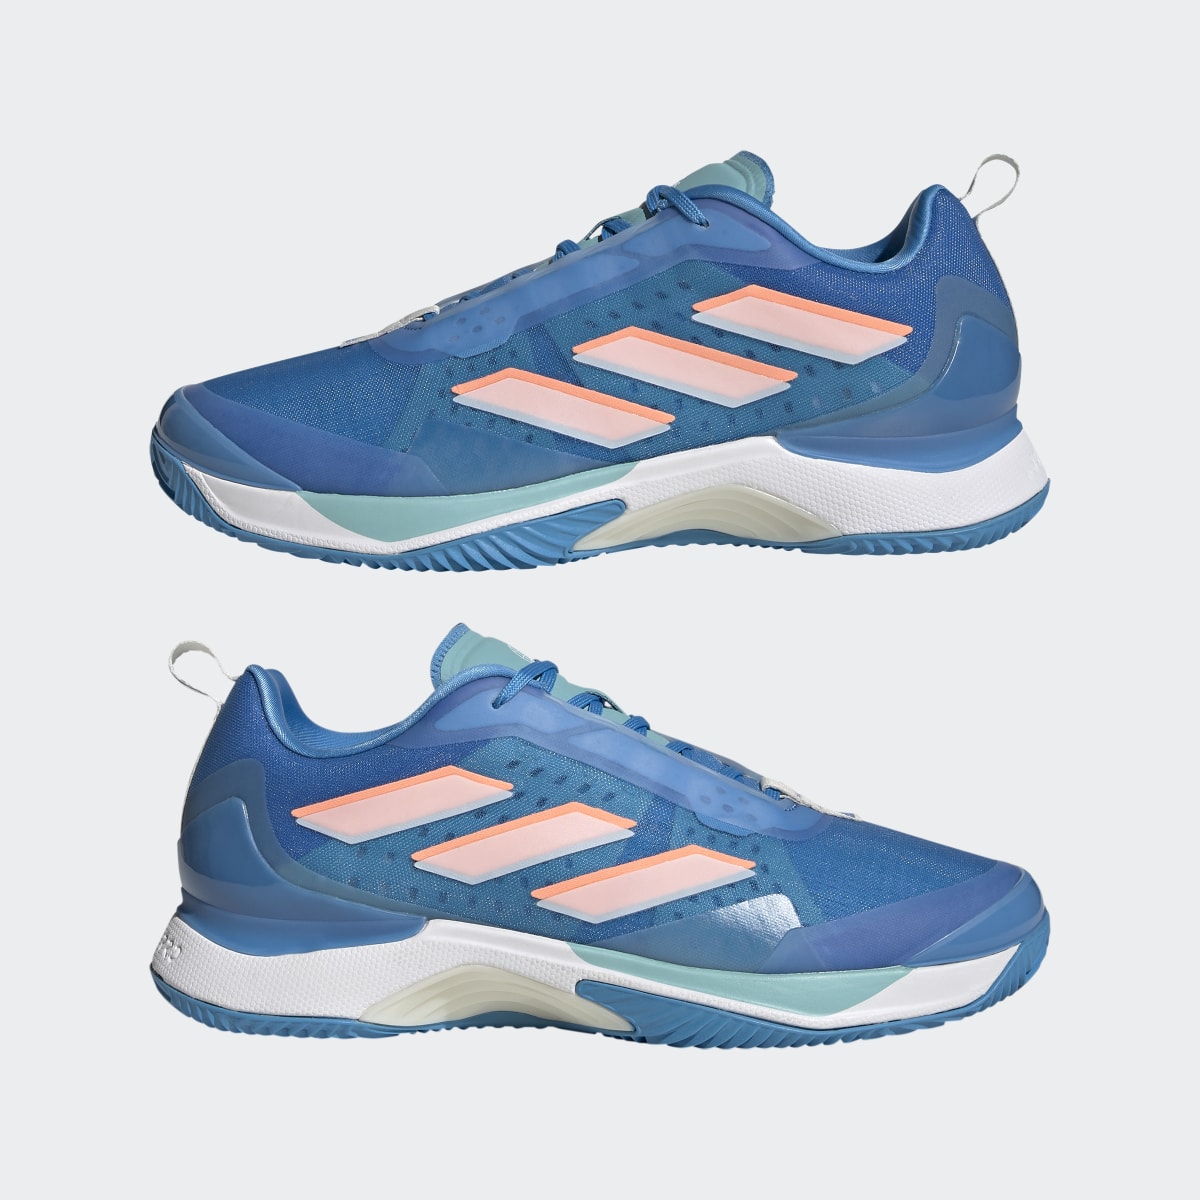 Adidas Avacourt Clay Court Tennis Shoes. 8